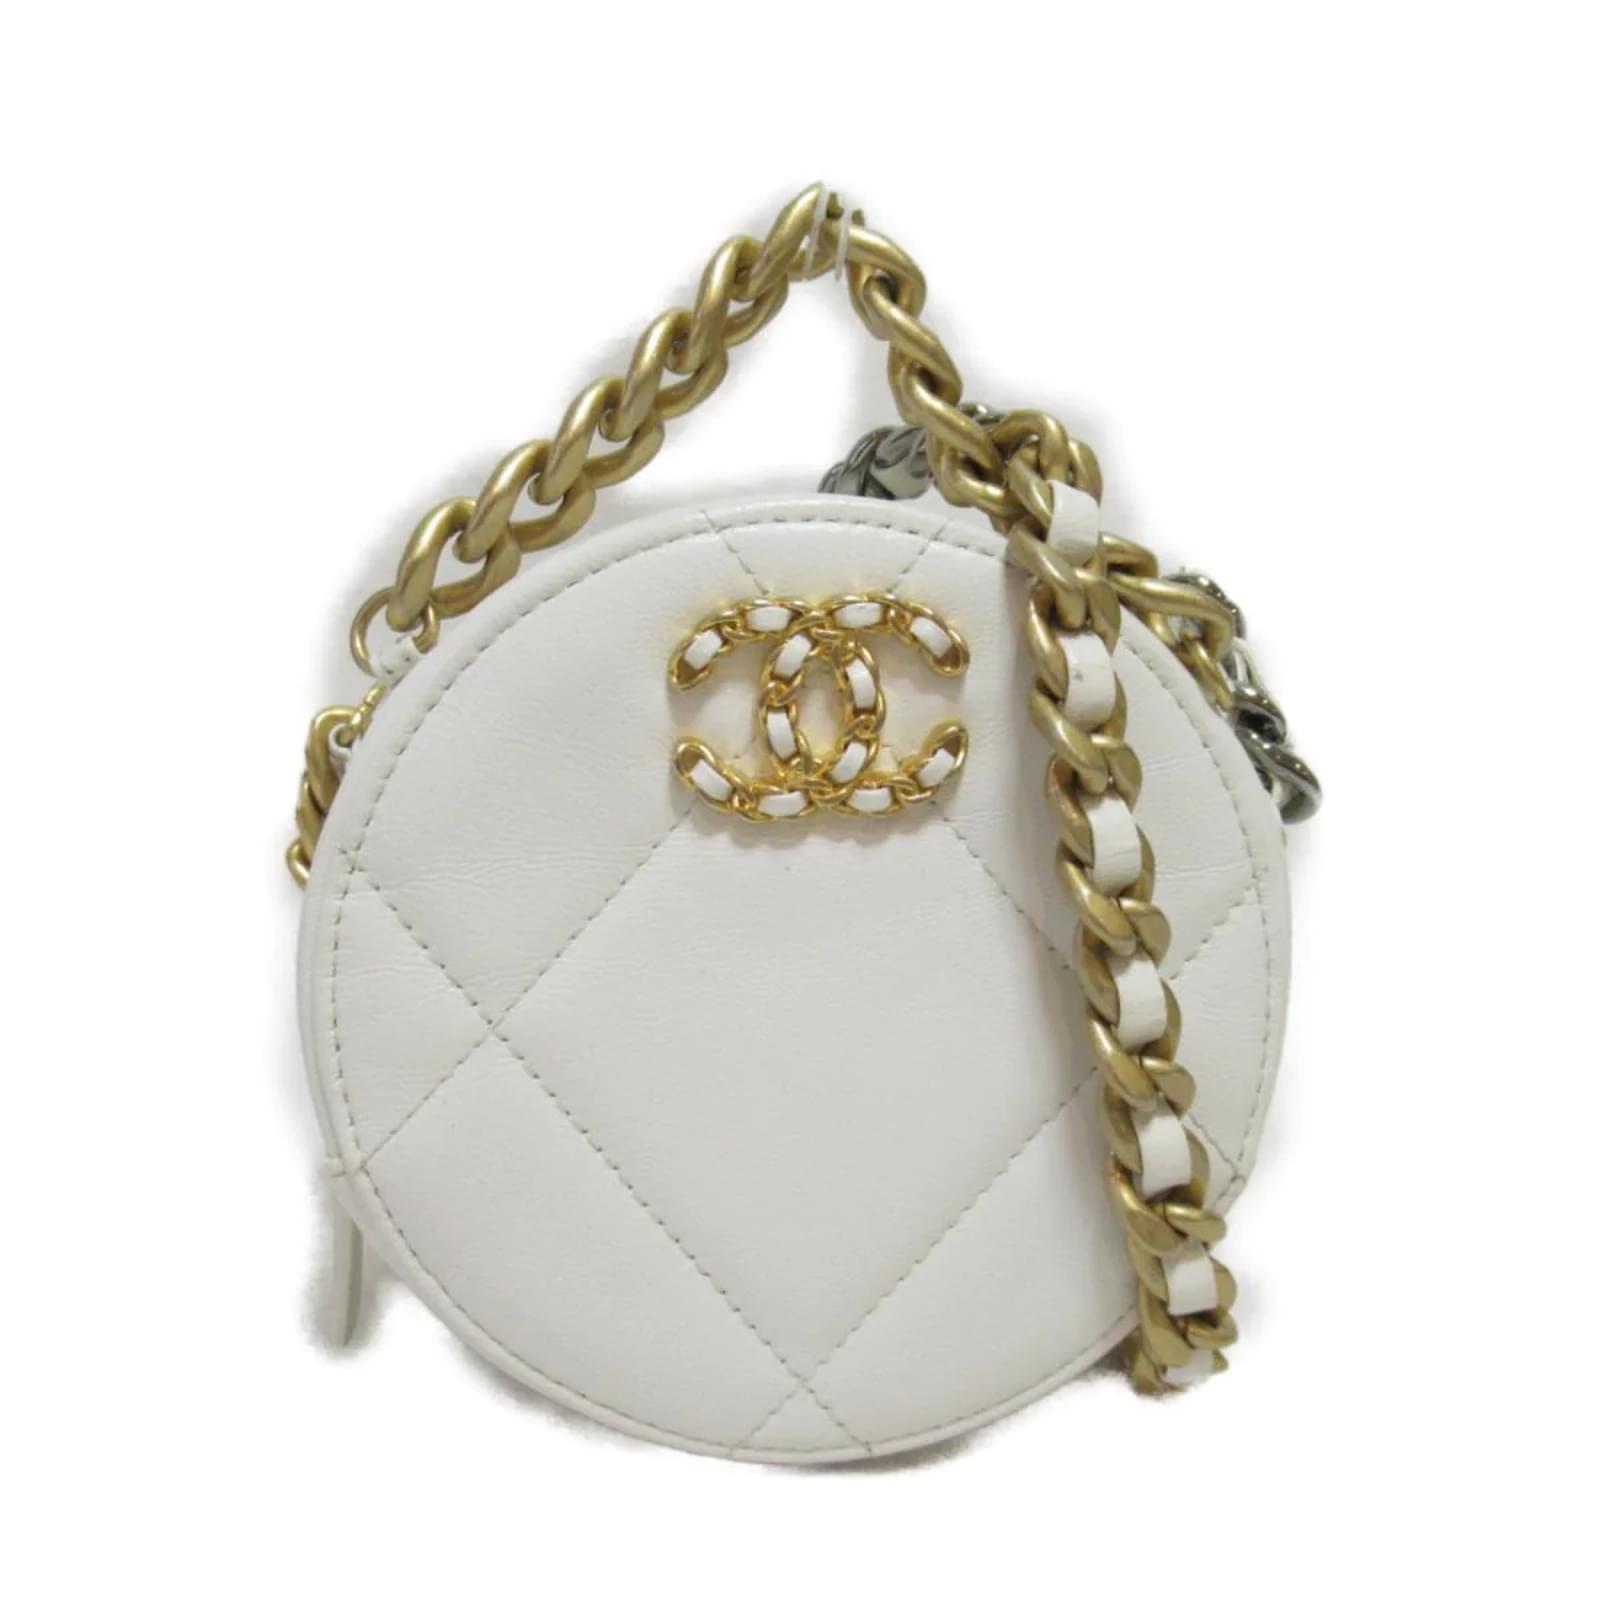 Chanel round 19 Clutch on Chain White Leather Pony-style calfskin